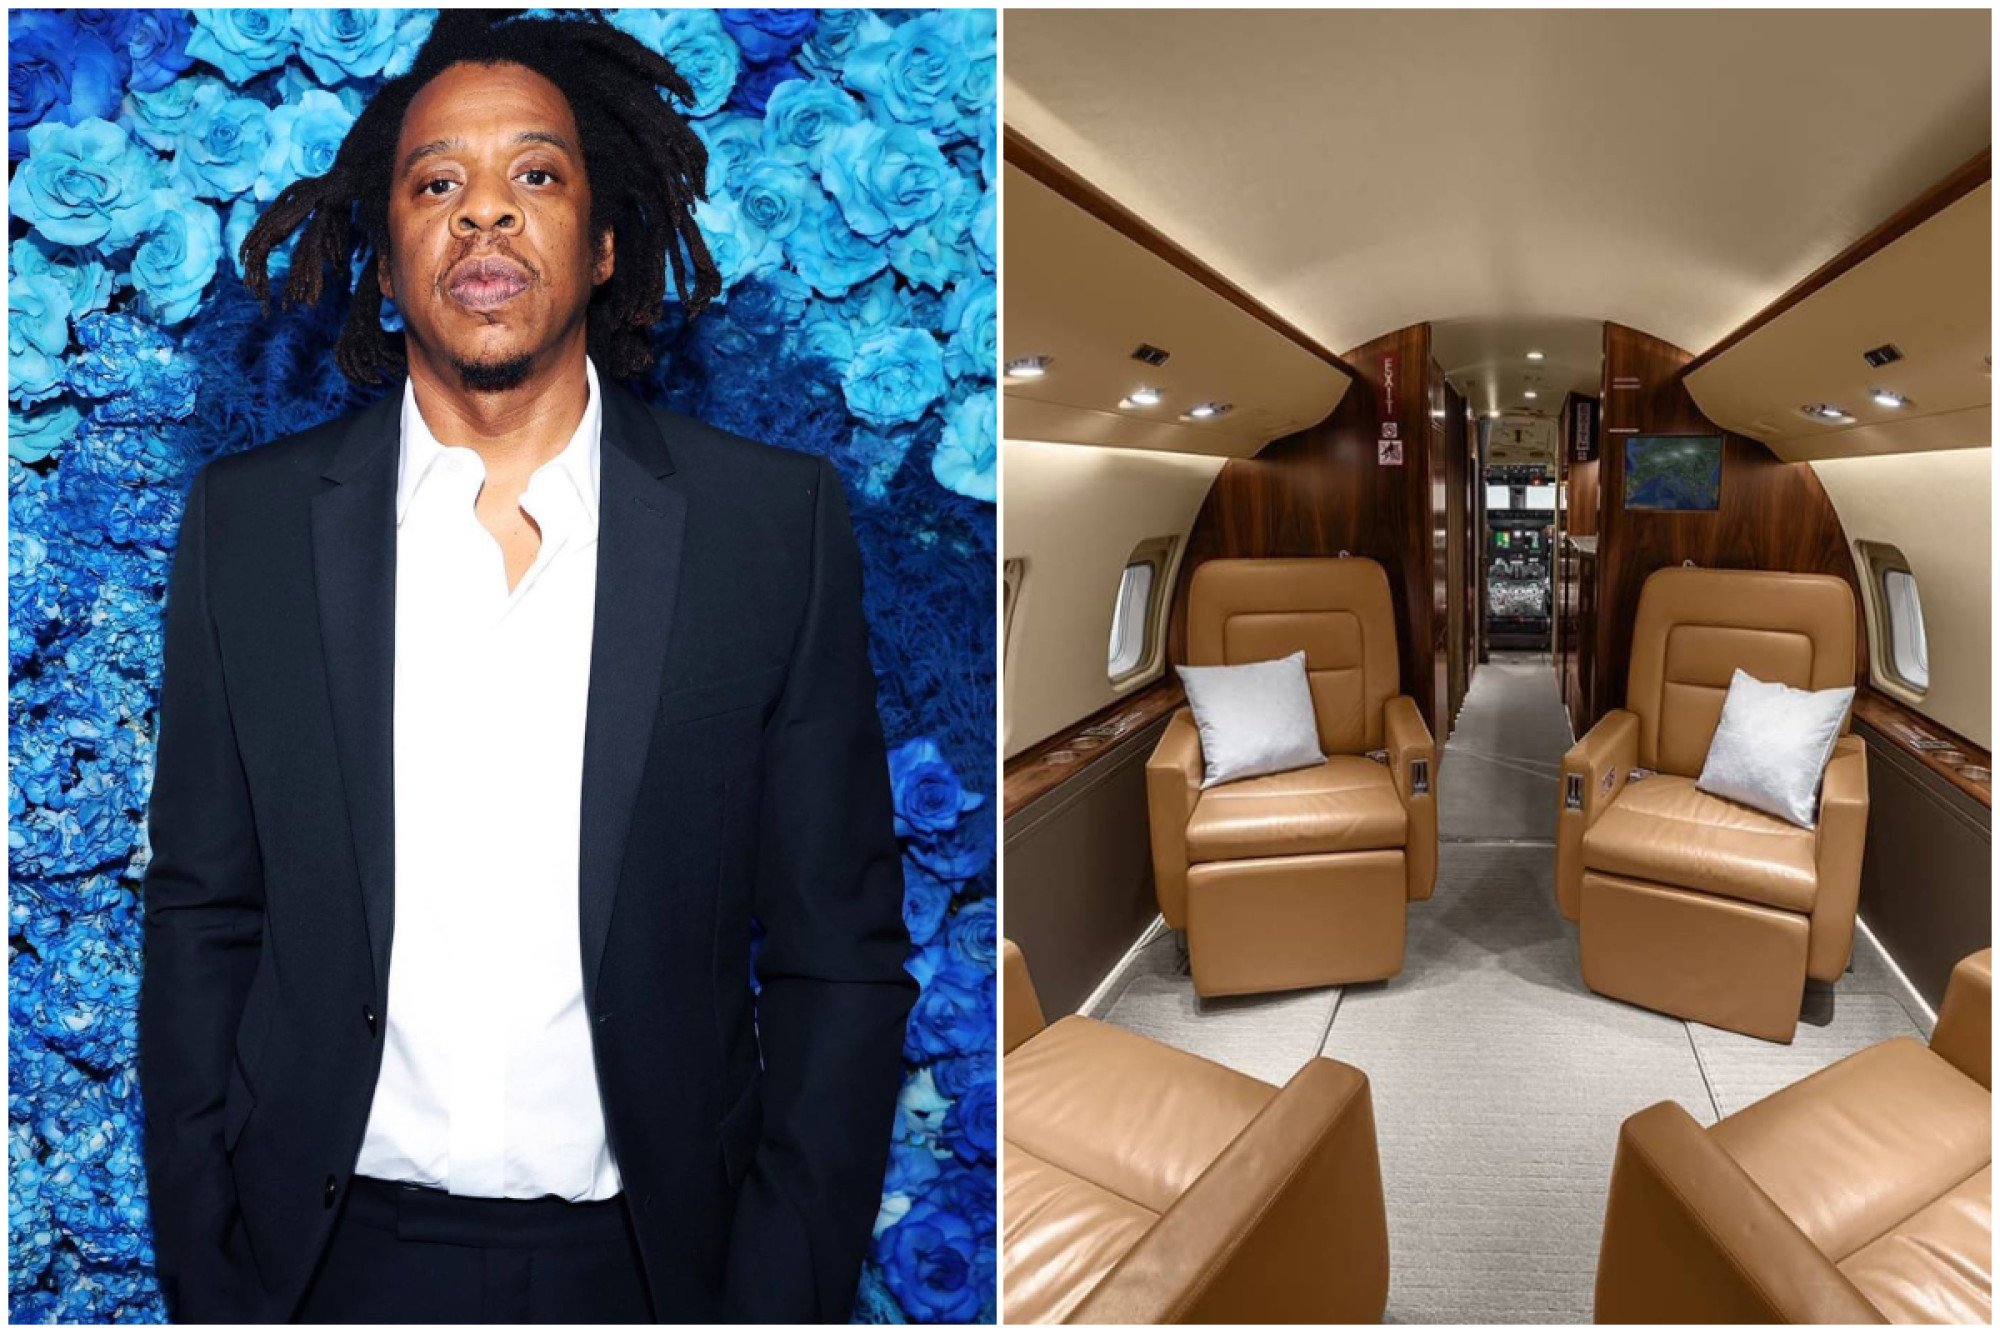 Jay-Z is worth US$1.3 billion and currently owns a Bombardier Challenger 850 with his wife Beyoncé. Photos: @allthingsjayz/Instagram; Business Aviation World/Facebook